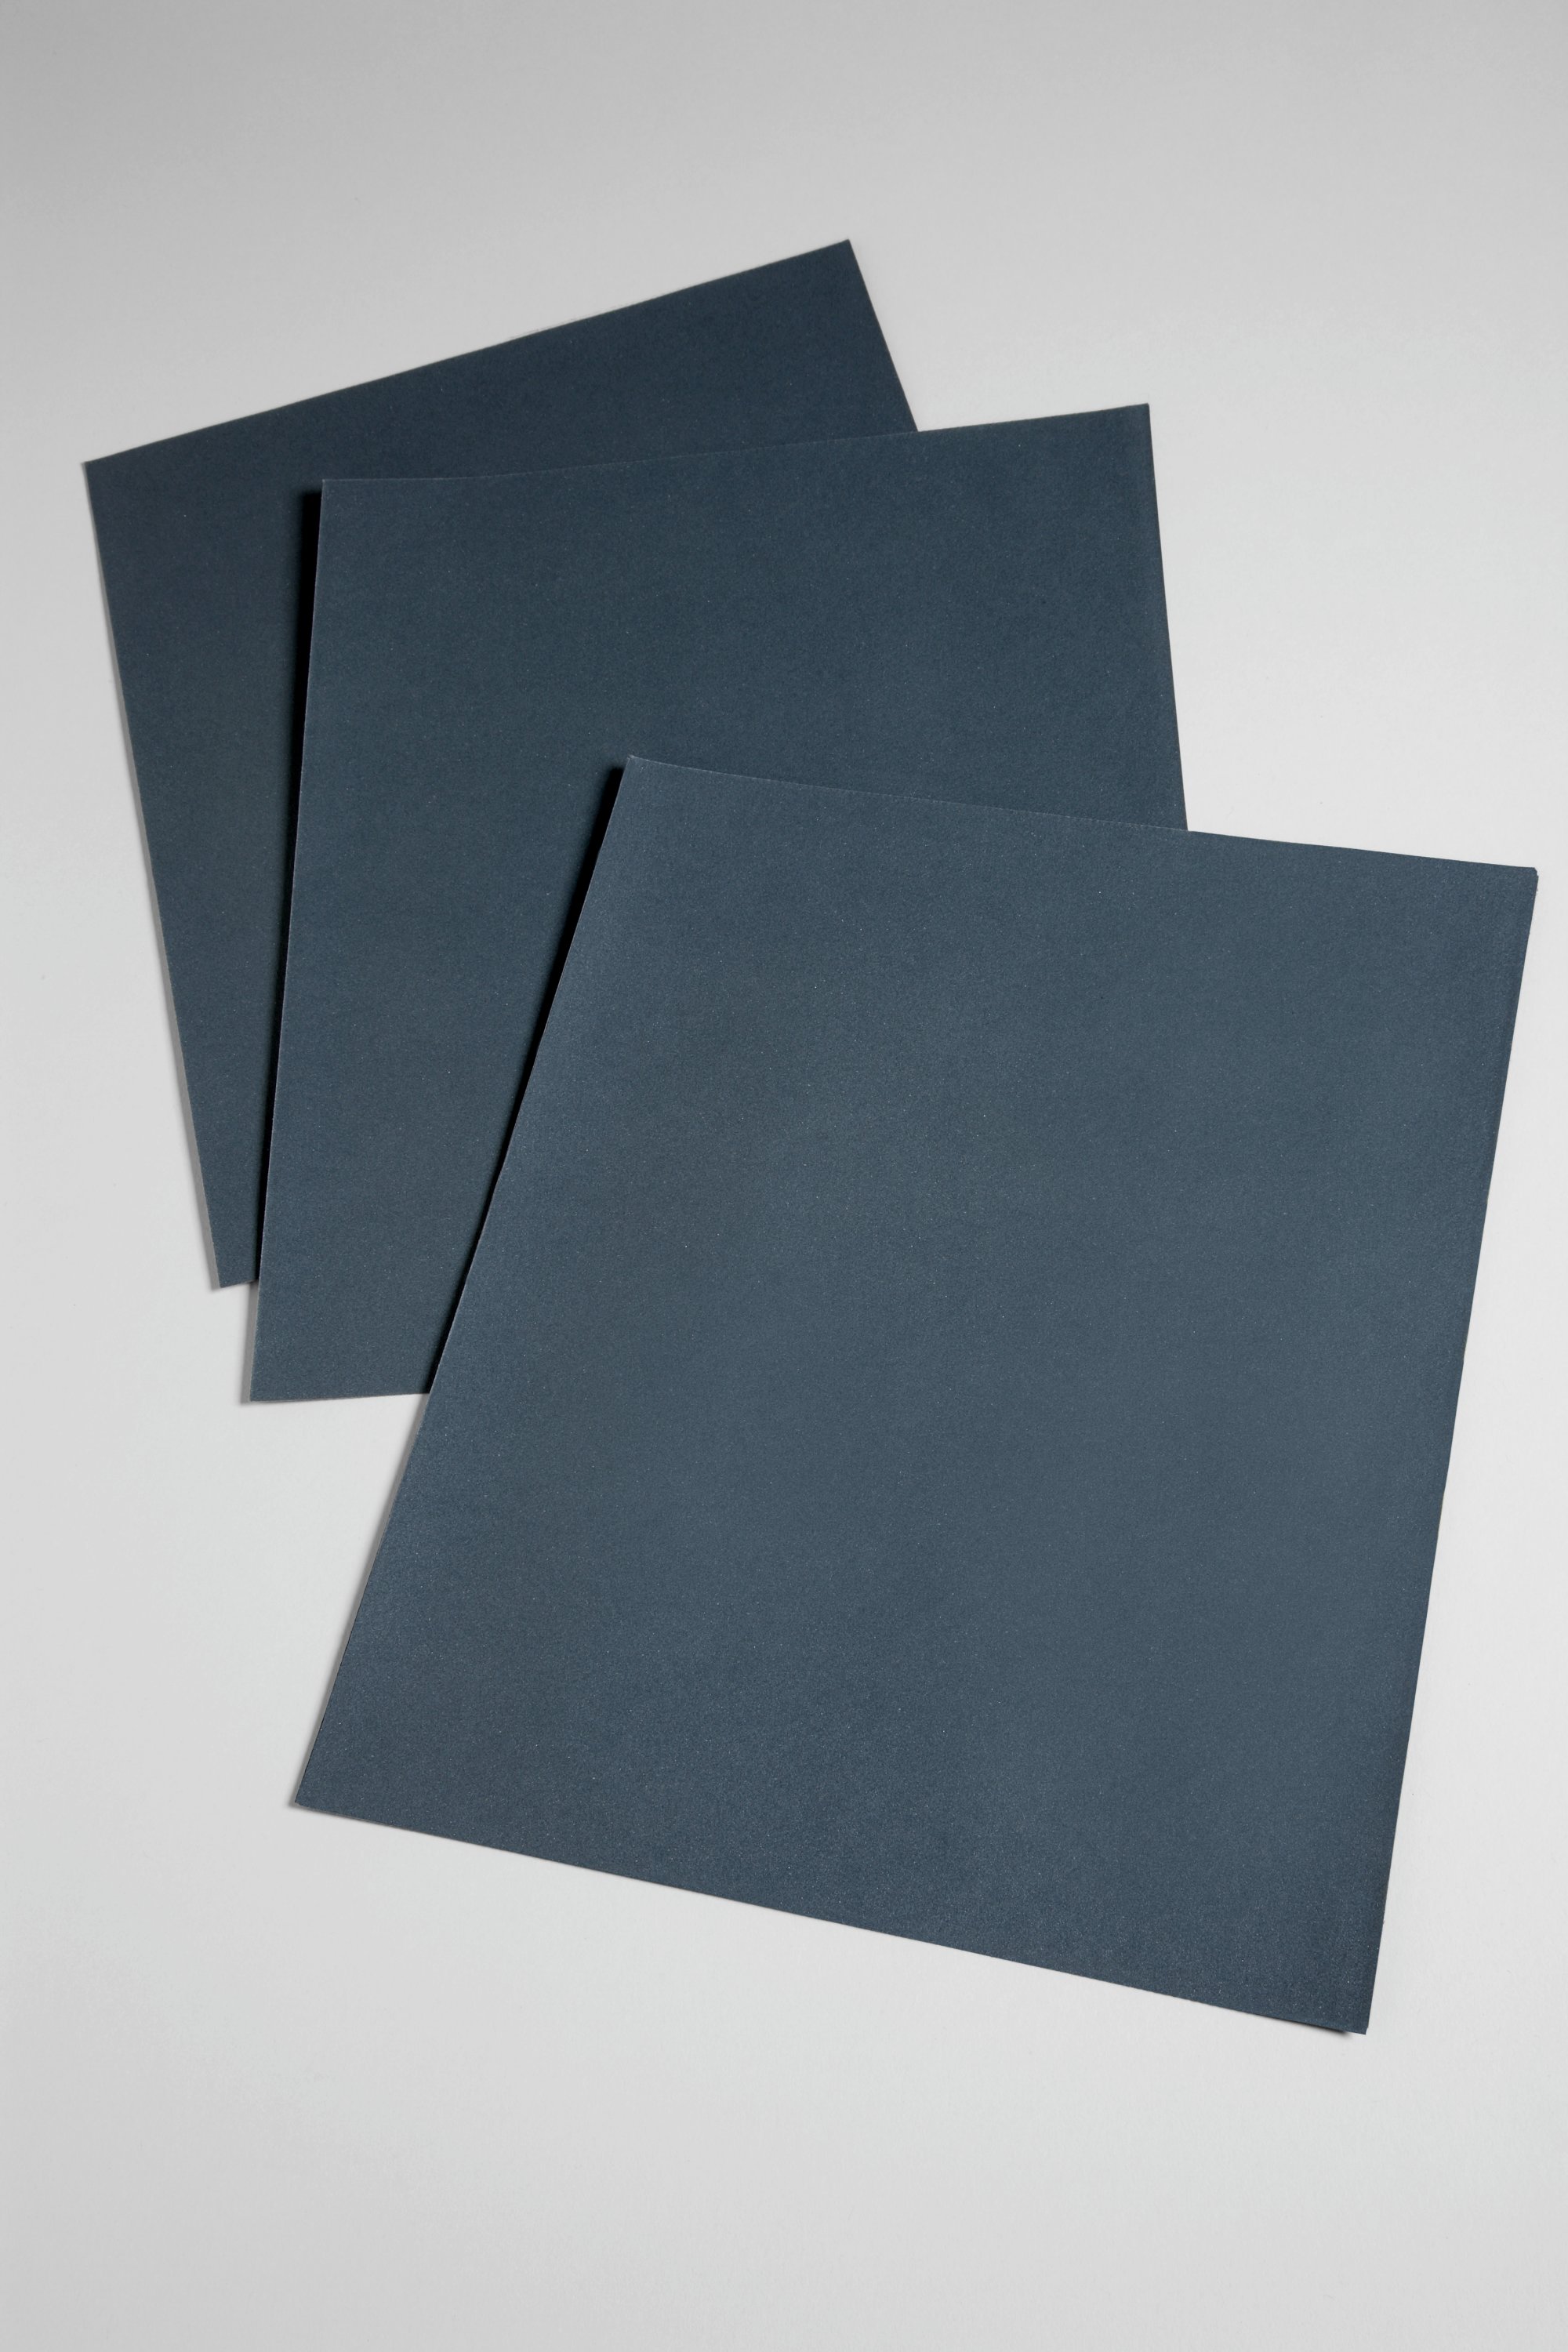 3M™ Wetordry™ Abrasive Sheet 413Q is best suited for metal sanding and finishing thanks to its versatility and fast cutting abrasive material.